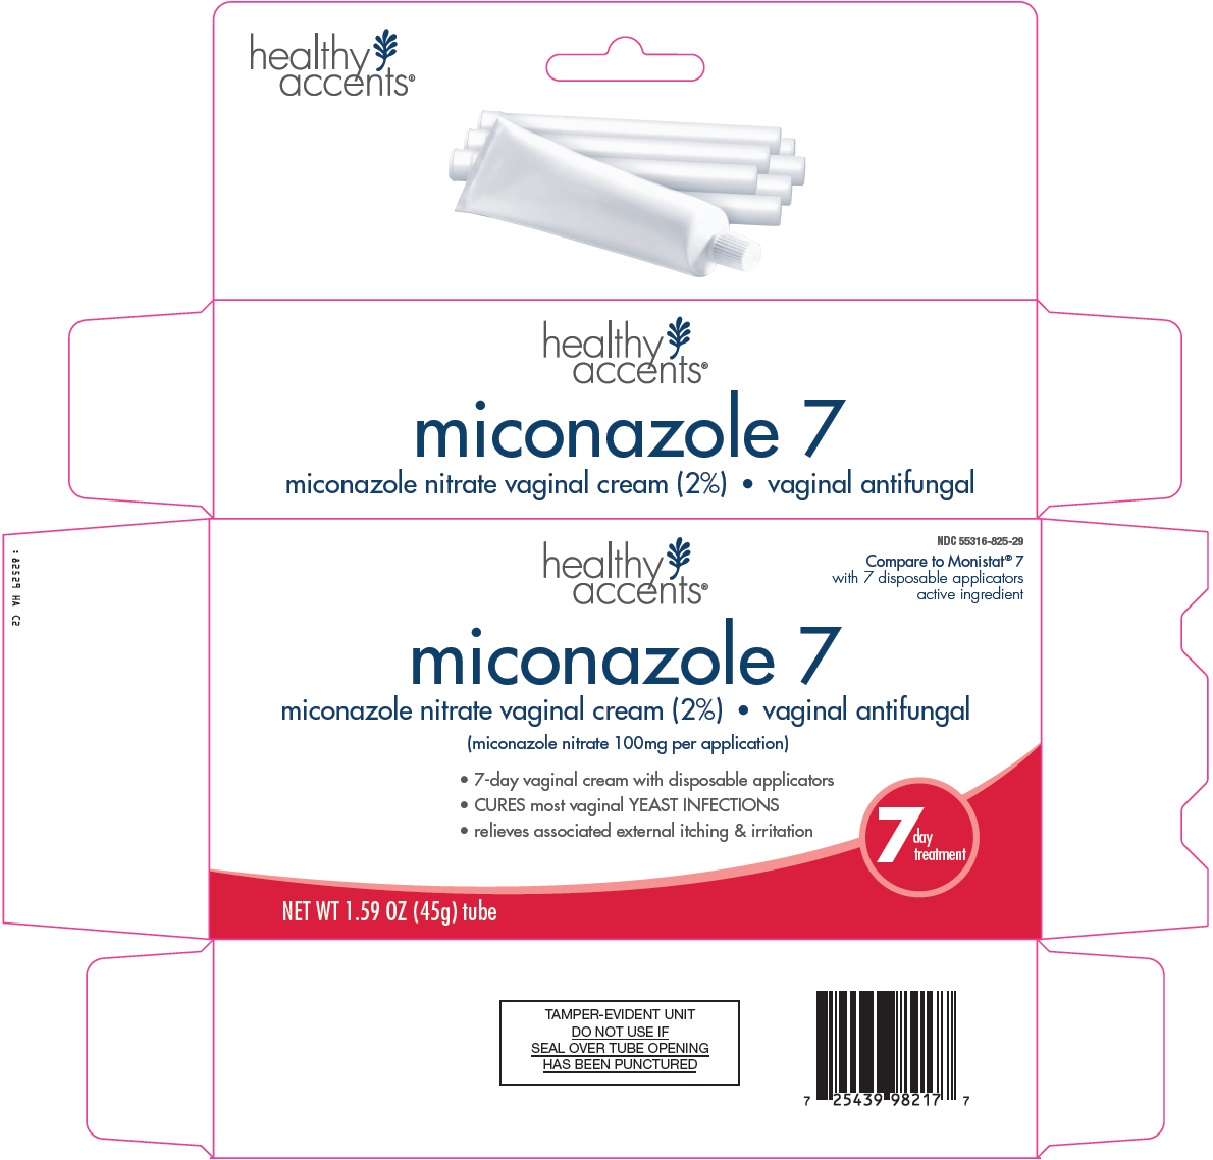 Healthy Accents Miconazole 7 image 1